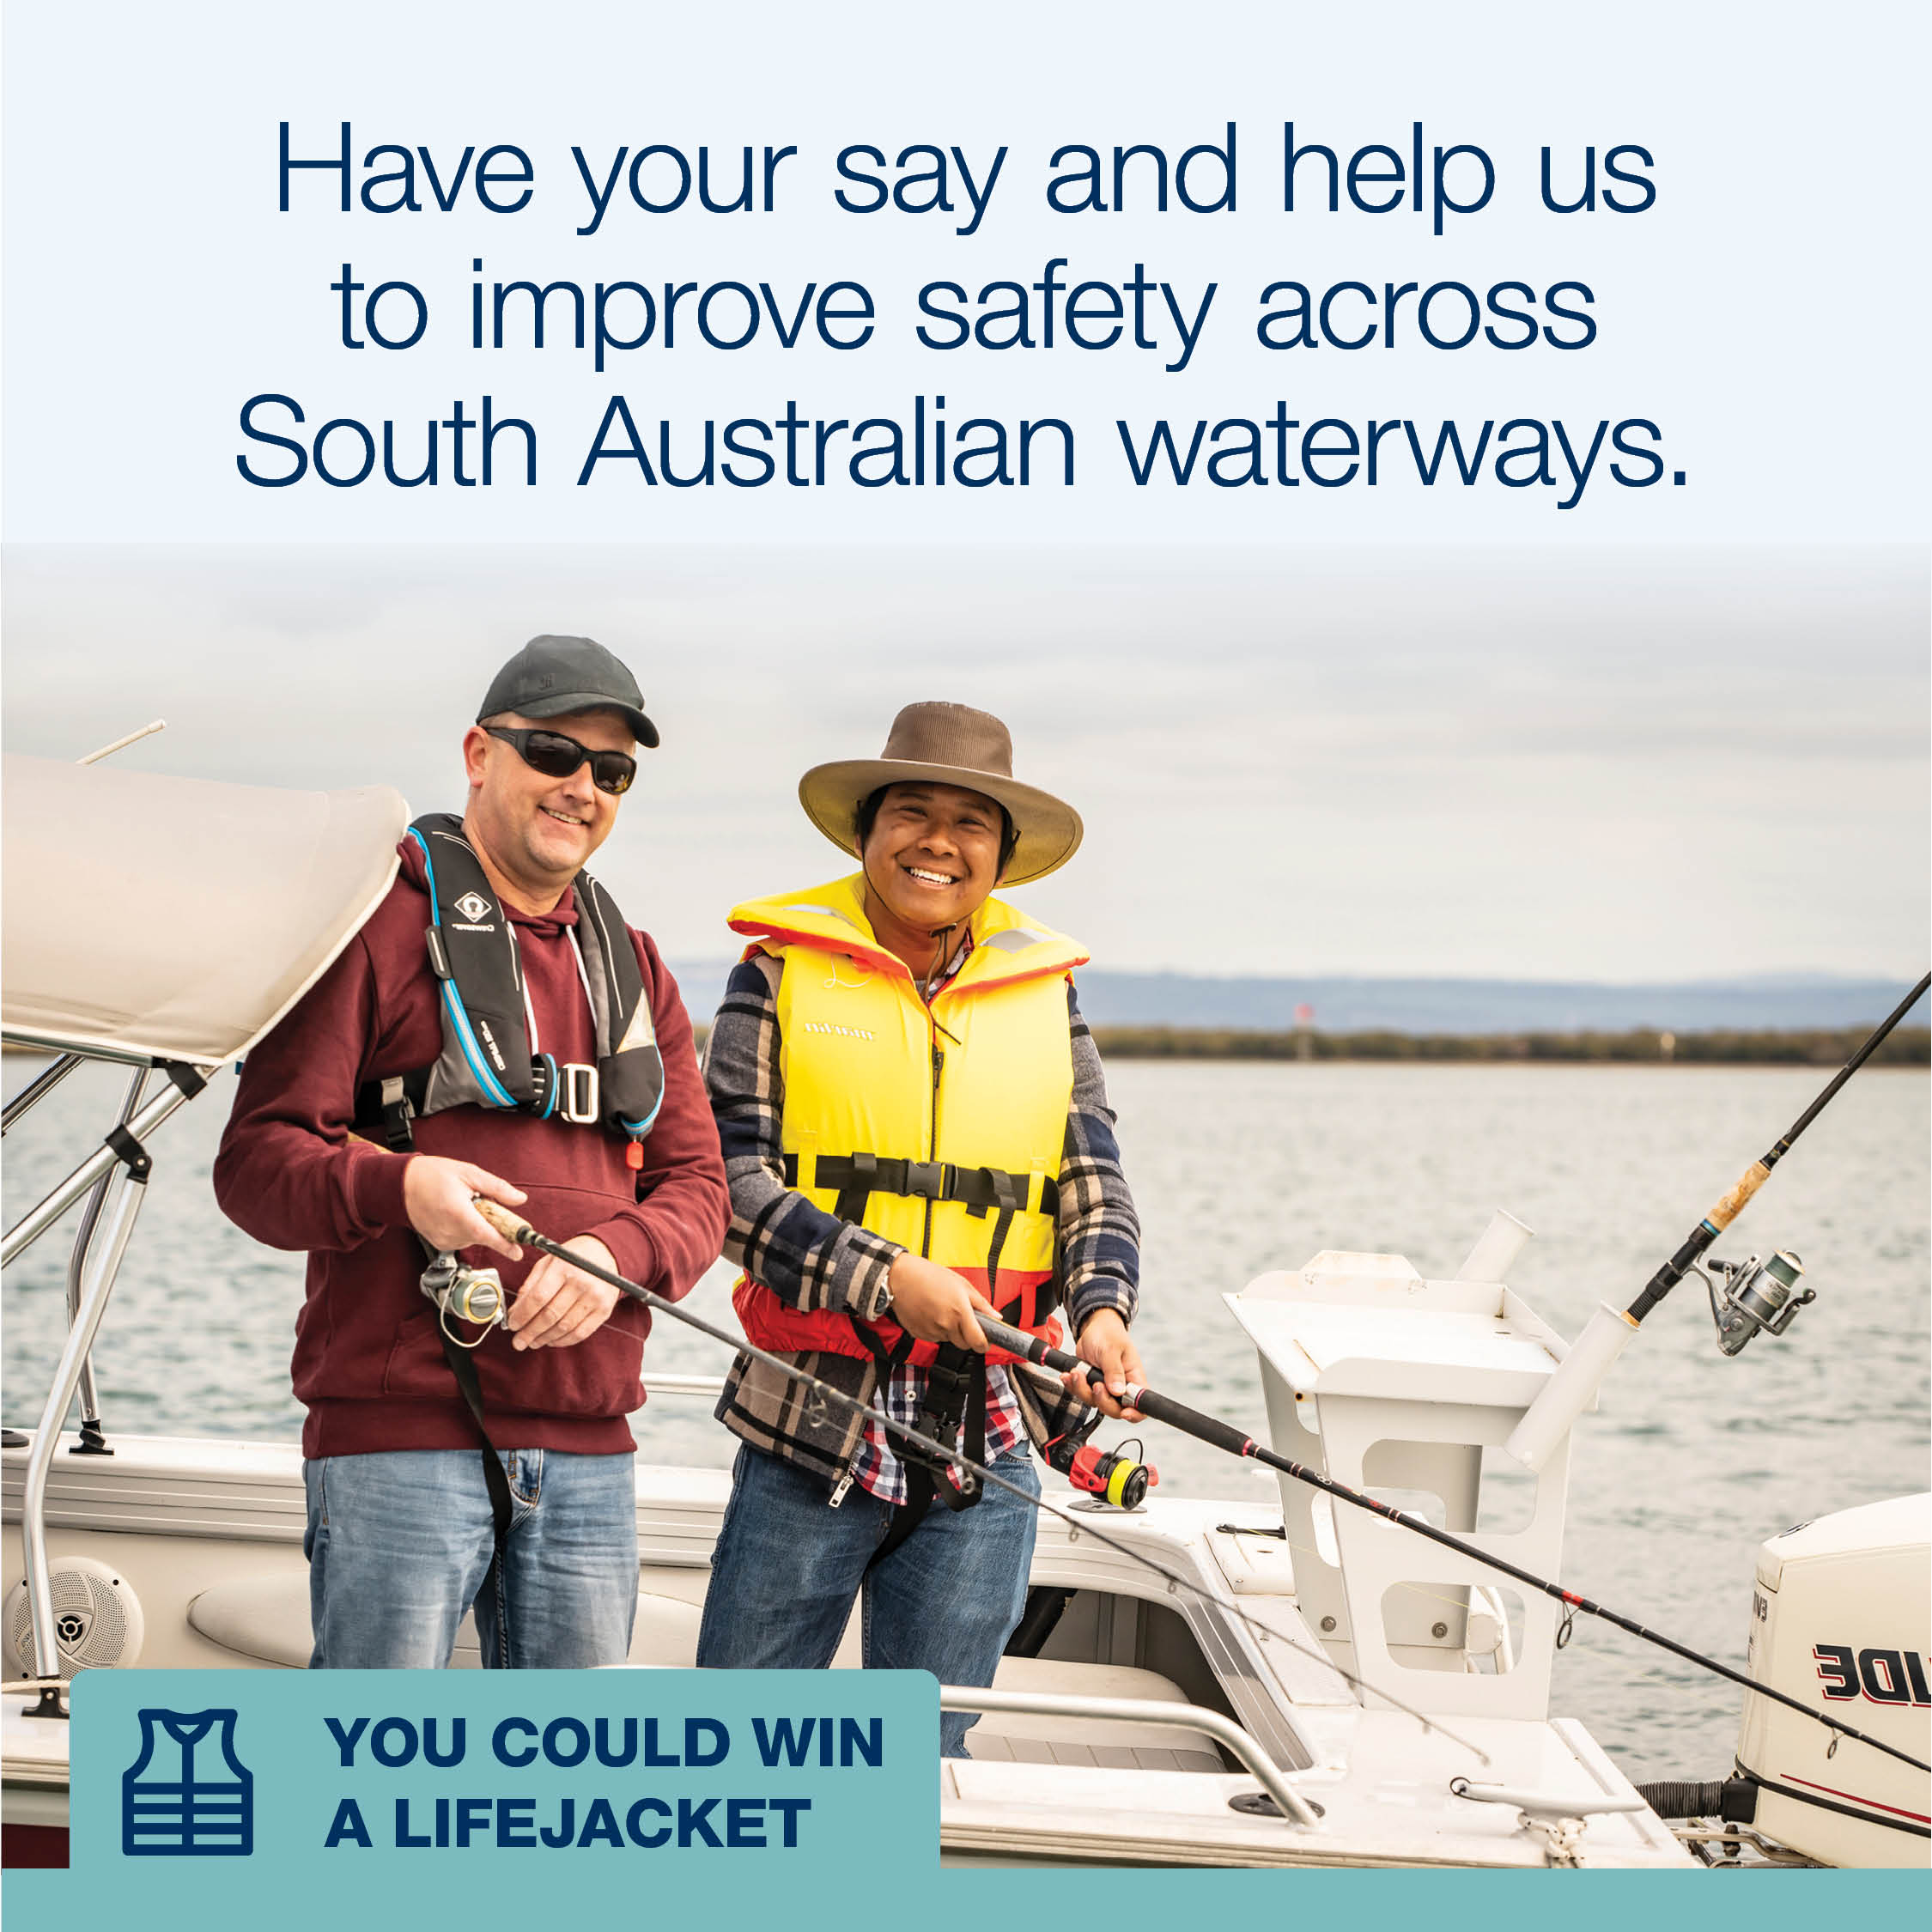 Two men fishing on a boat with a promotion about having your say on improving safety on SA waterways and the chance to win a lifejacket